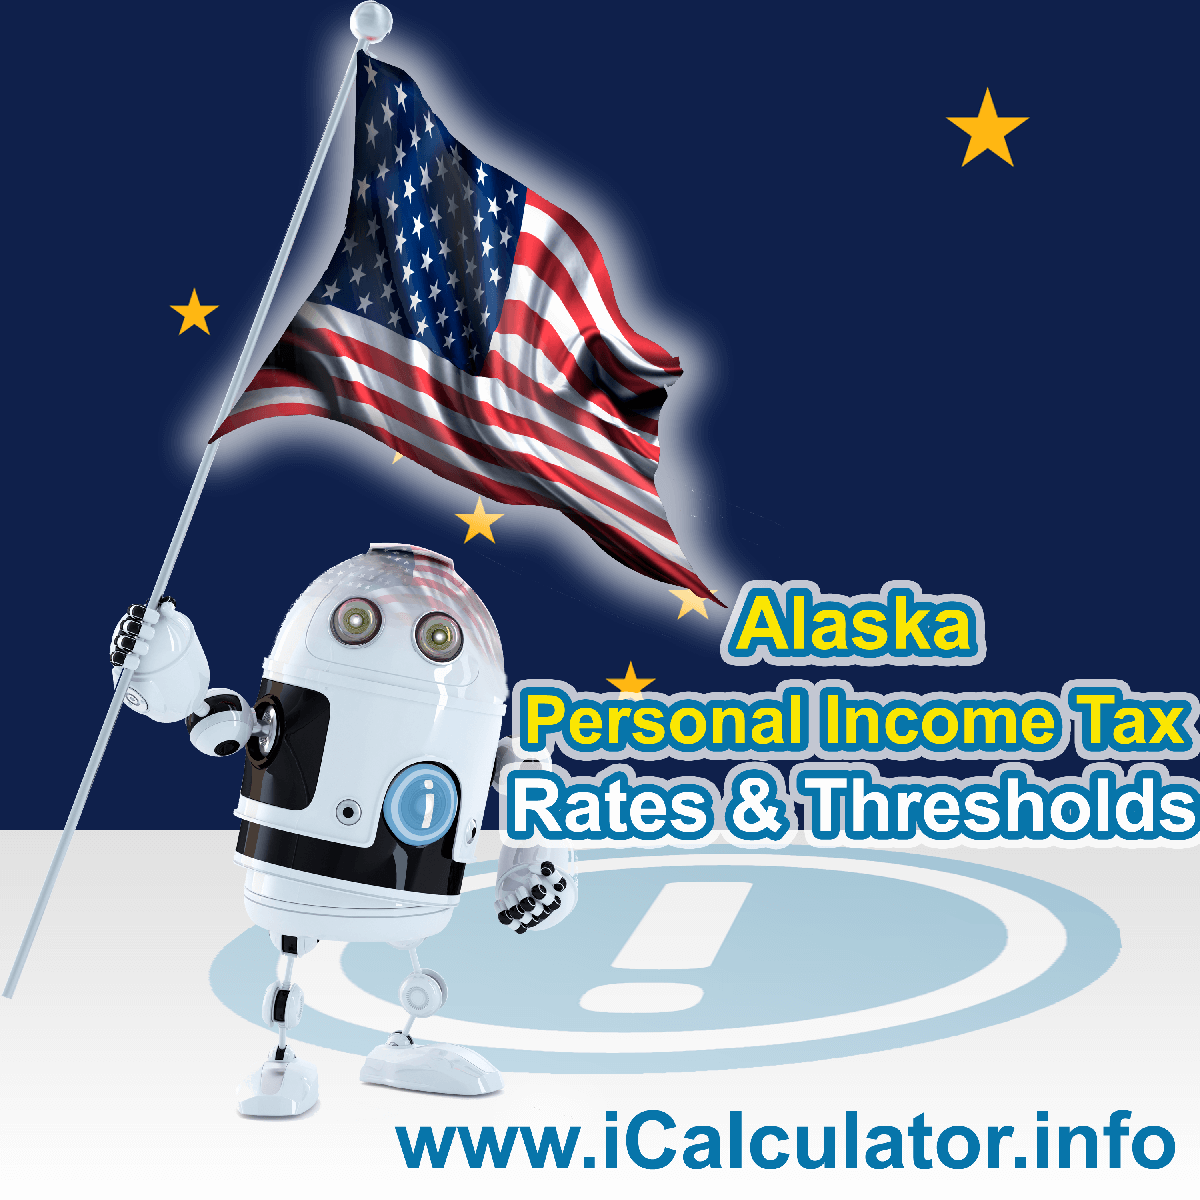 Alaska State Tax Tables 2015. This image displays details of the Alaska State Tax Tables for the 2015 tax return year which is provided in support of the 2015 US Tax Calculator